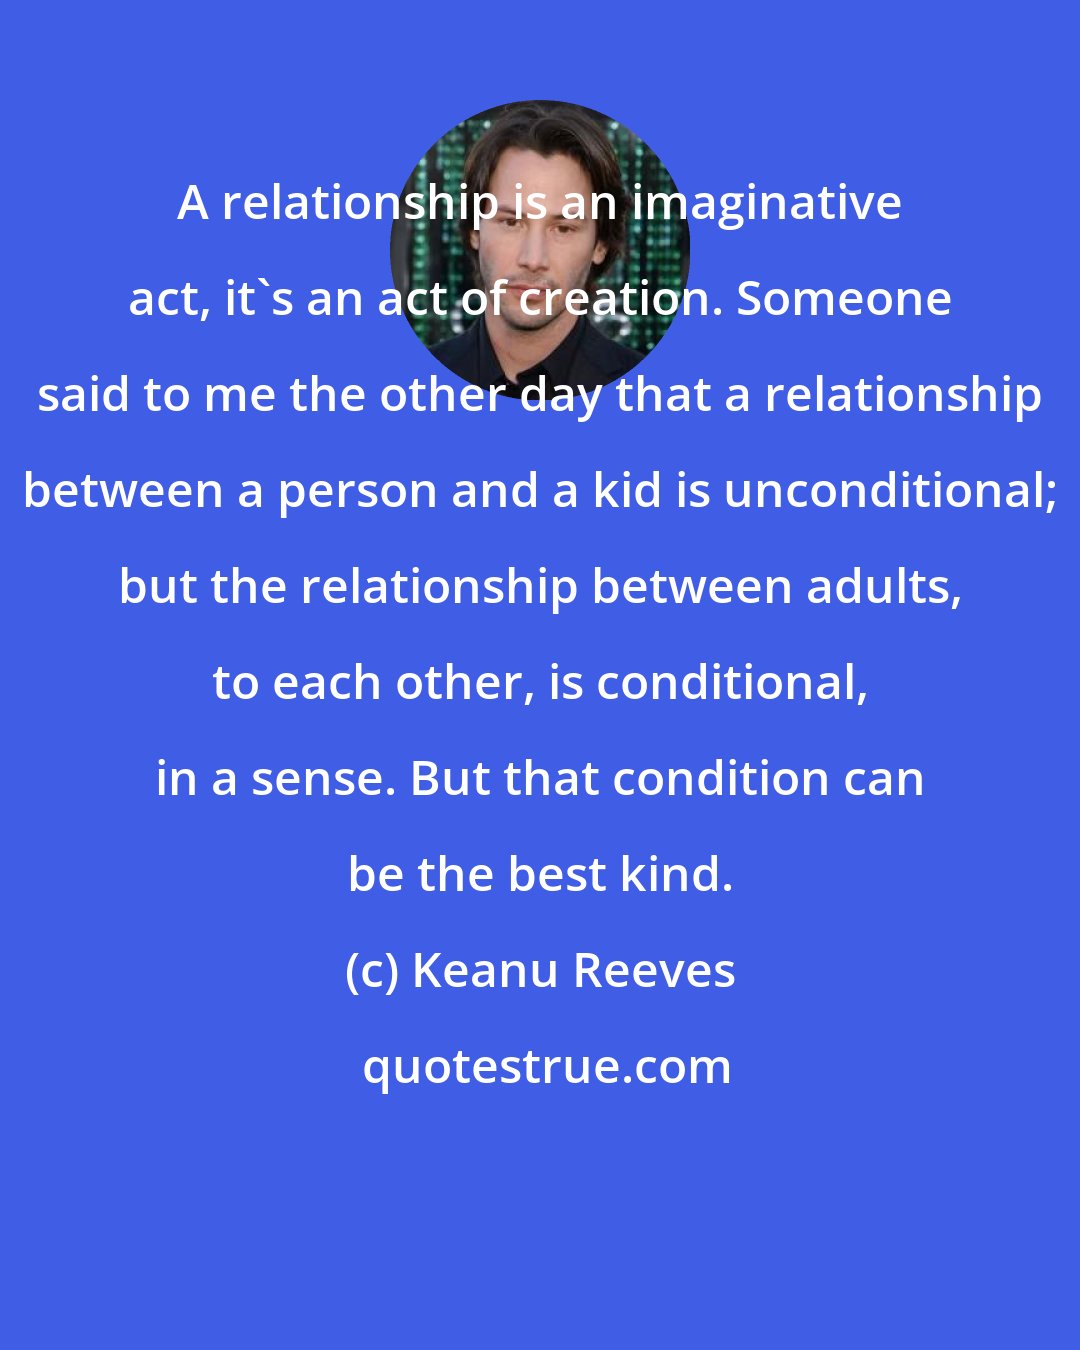 Keanu Reeves: A relationship is an imaginative act, it's an act of creation. Someone said to me the other day that a relationship between a person and a kid is unconditional; but the relationship between adults, to each other, is conditional, in a sense. But that condition can be the best kind.